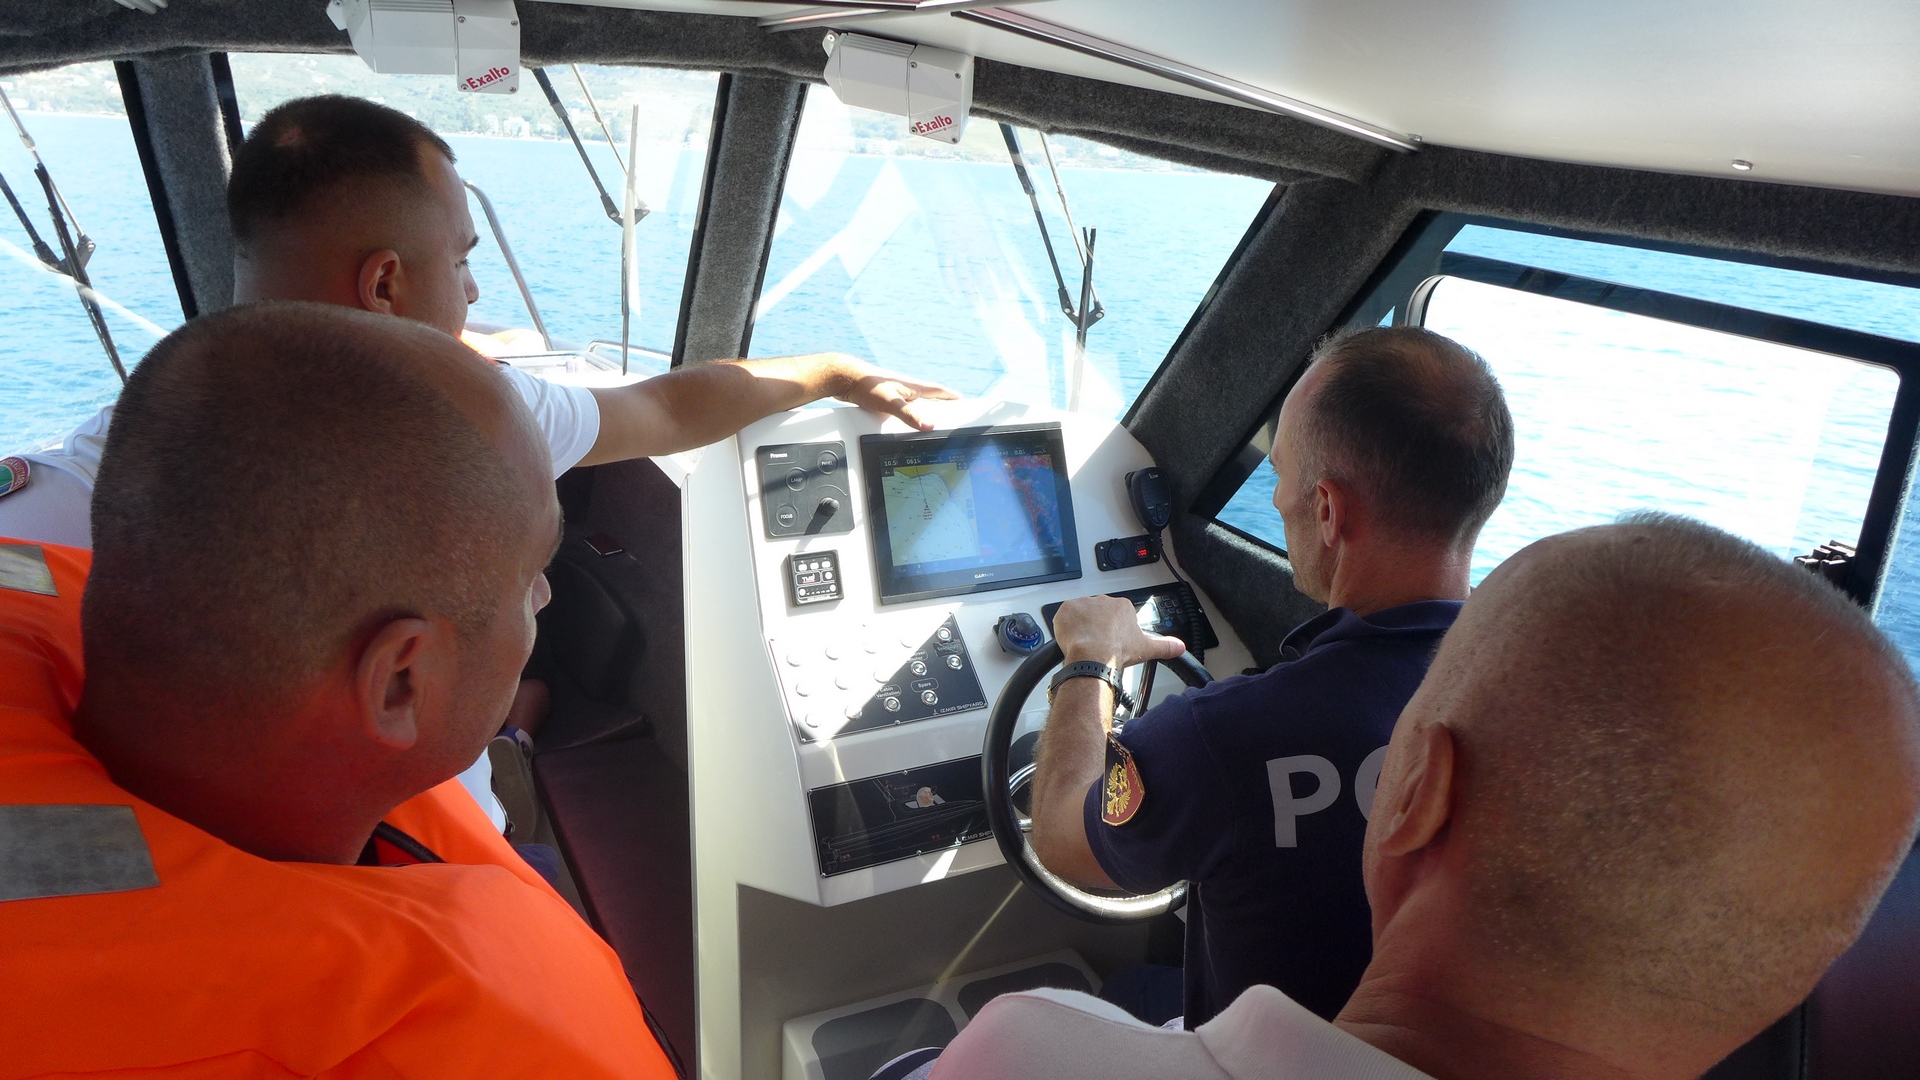 Training on the Use of Radars and Navigation